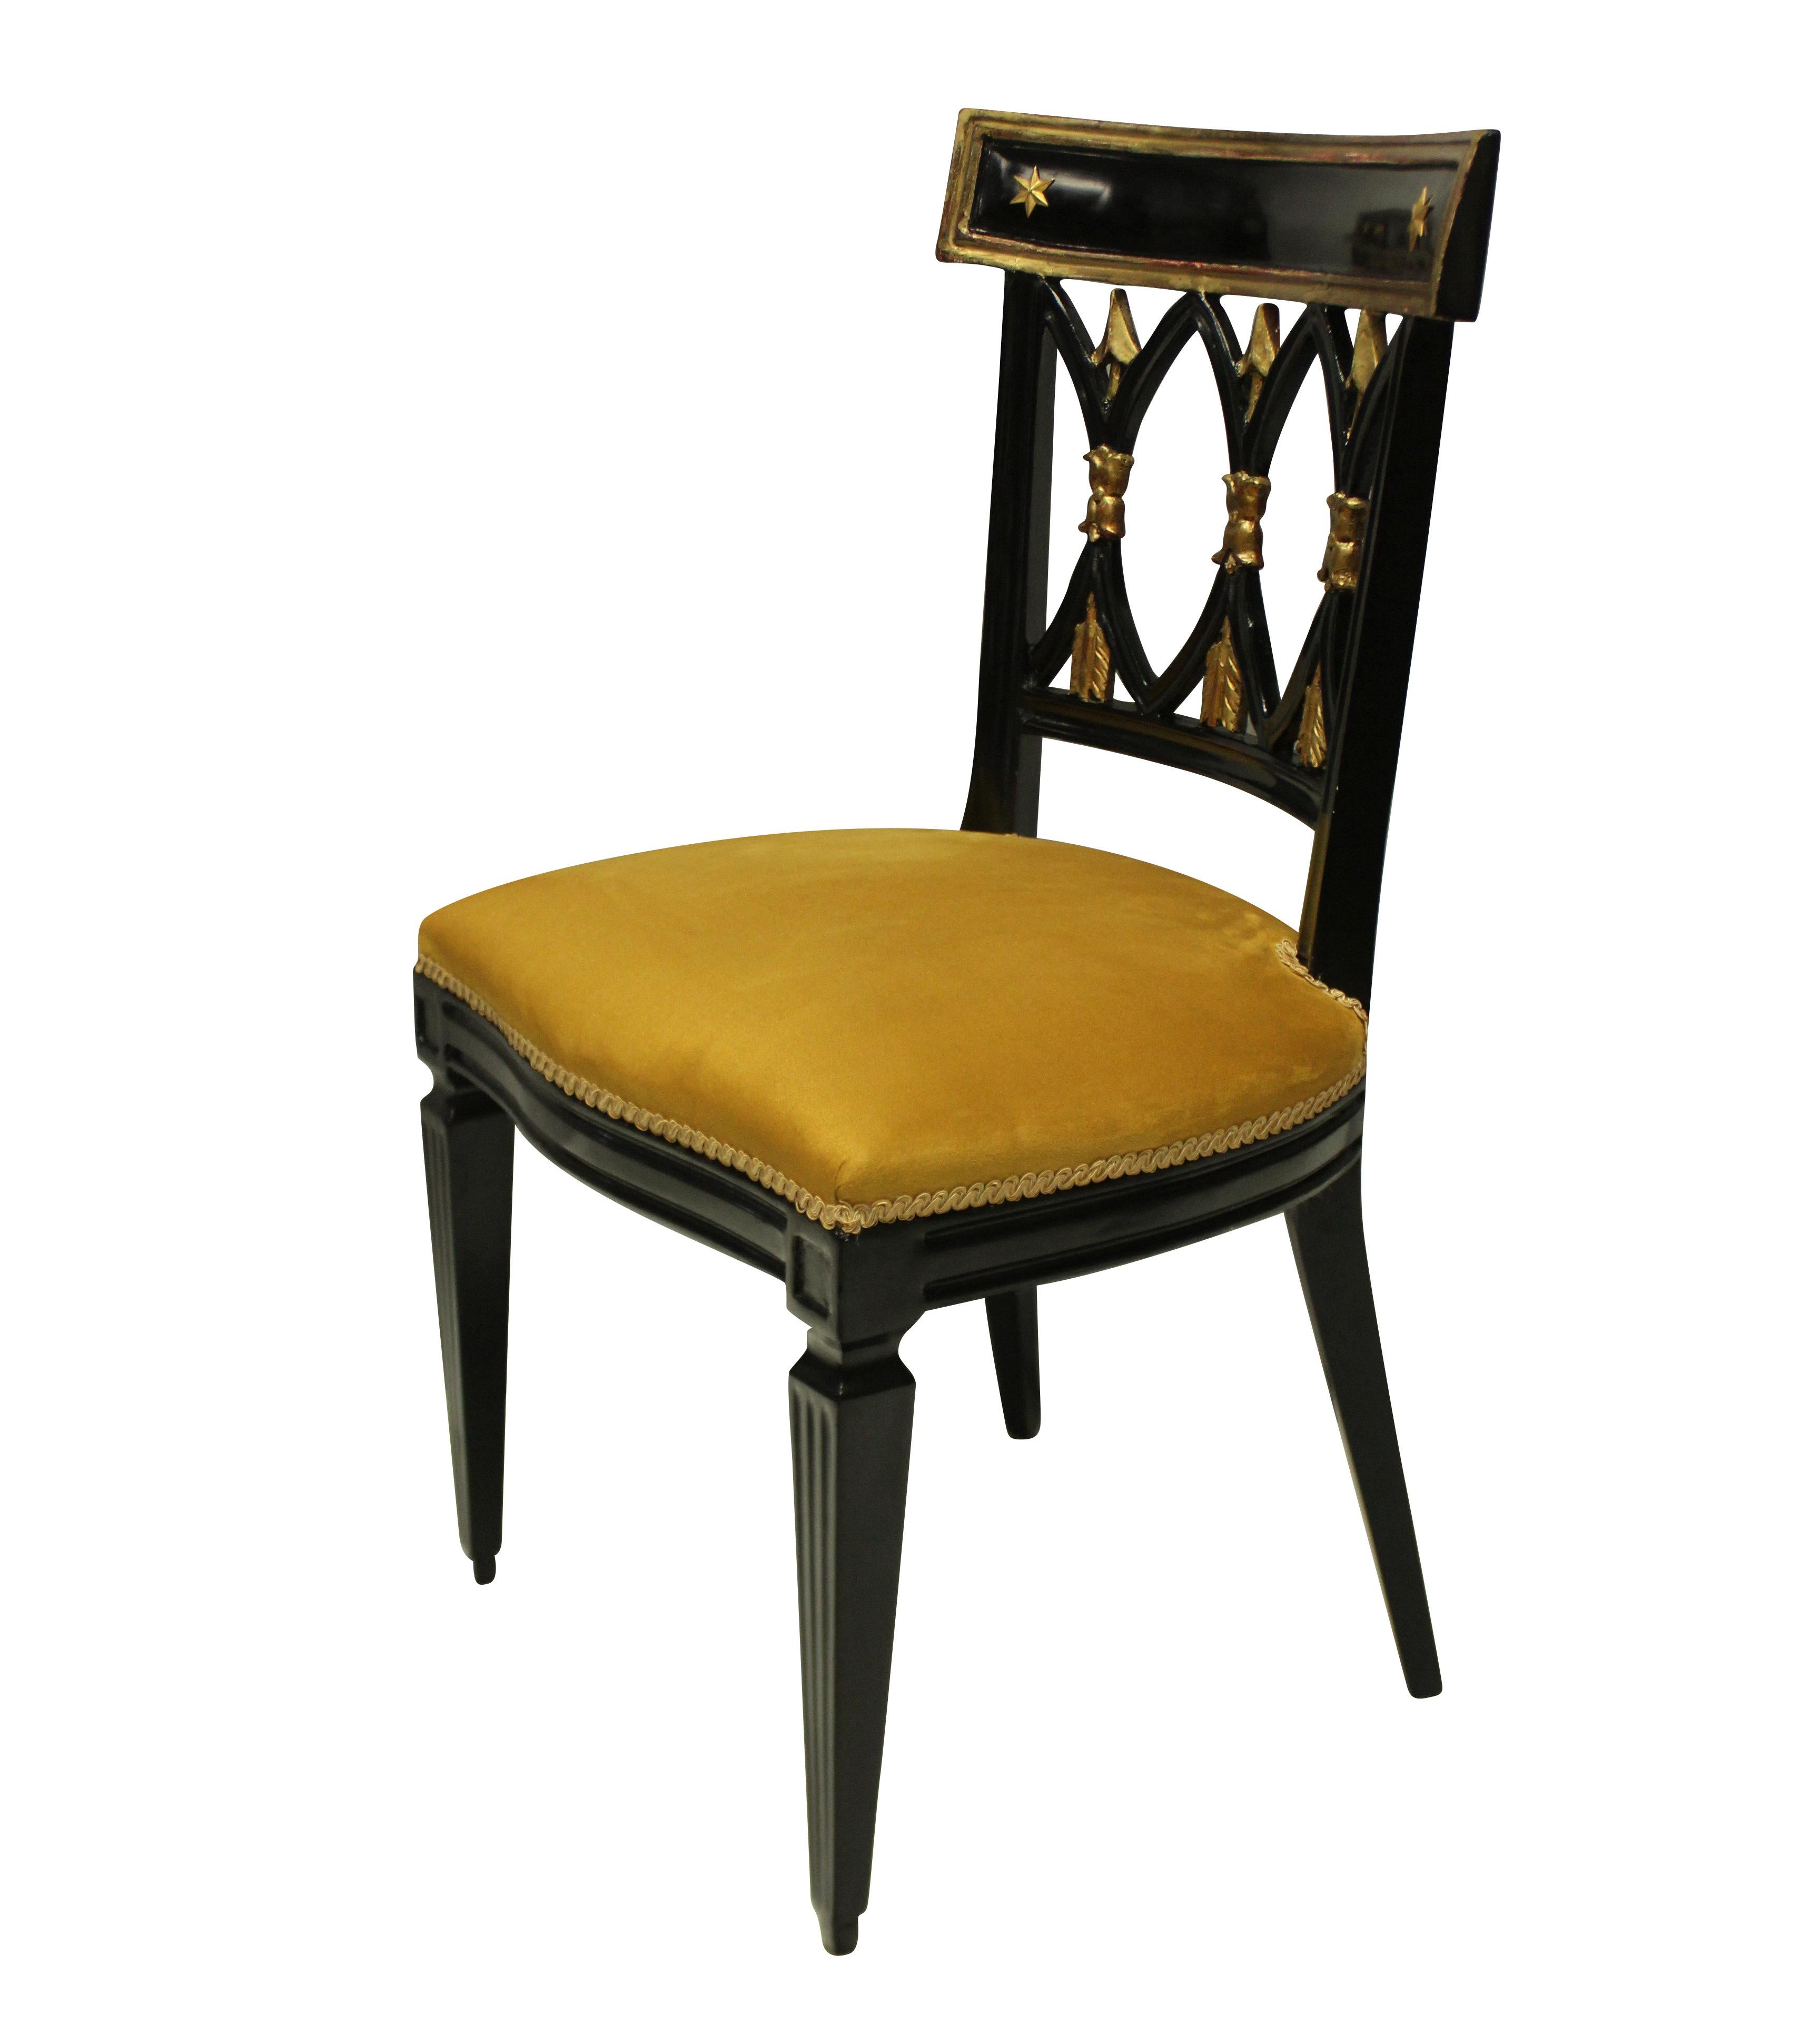 Mid-20th Century Pair of French Empire Revival Hall Chairs